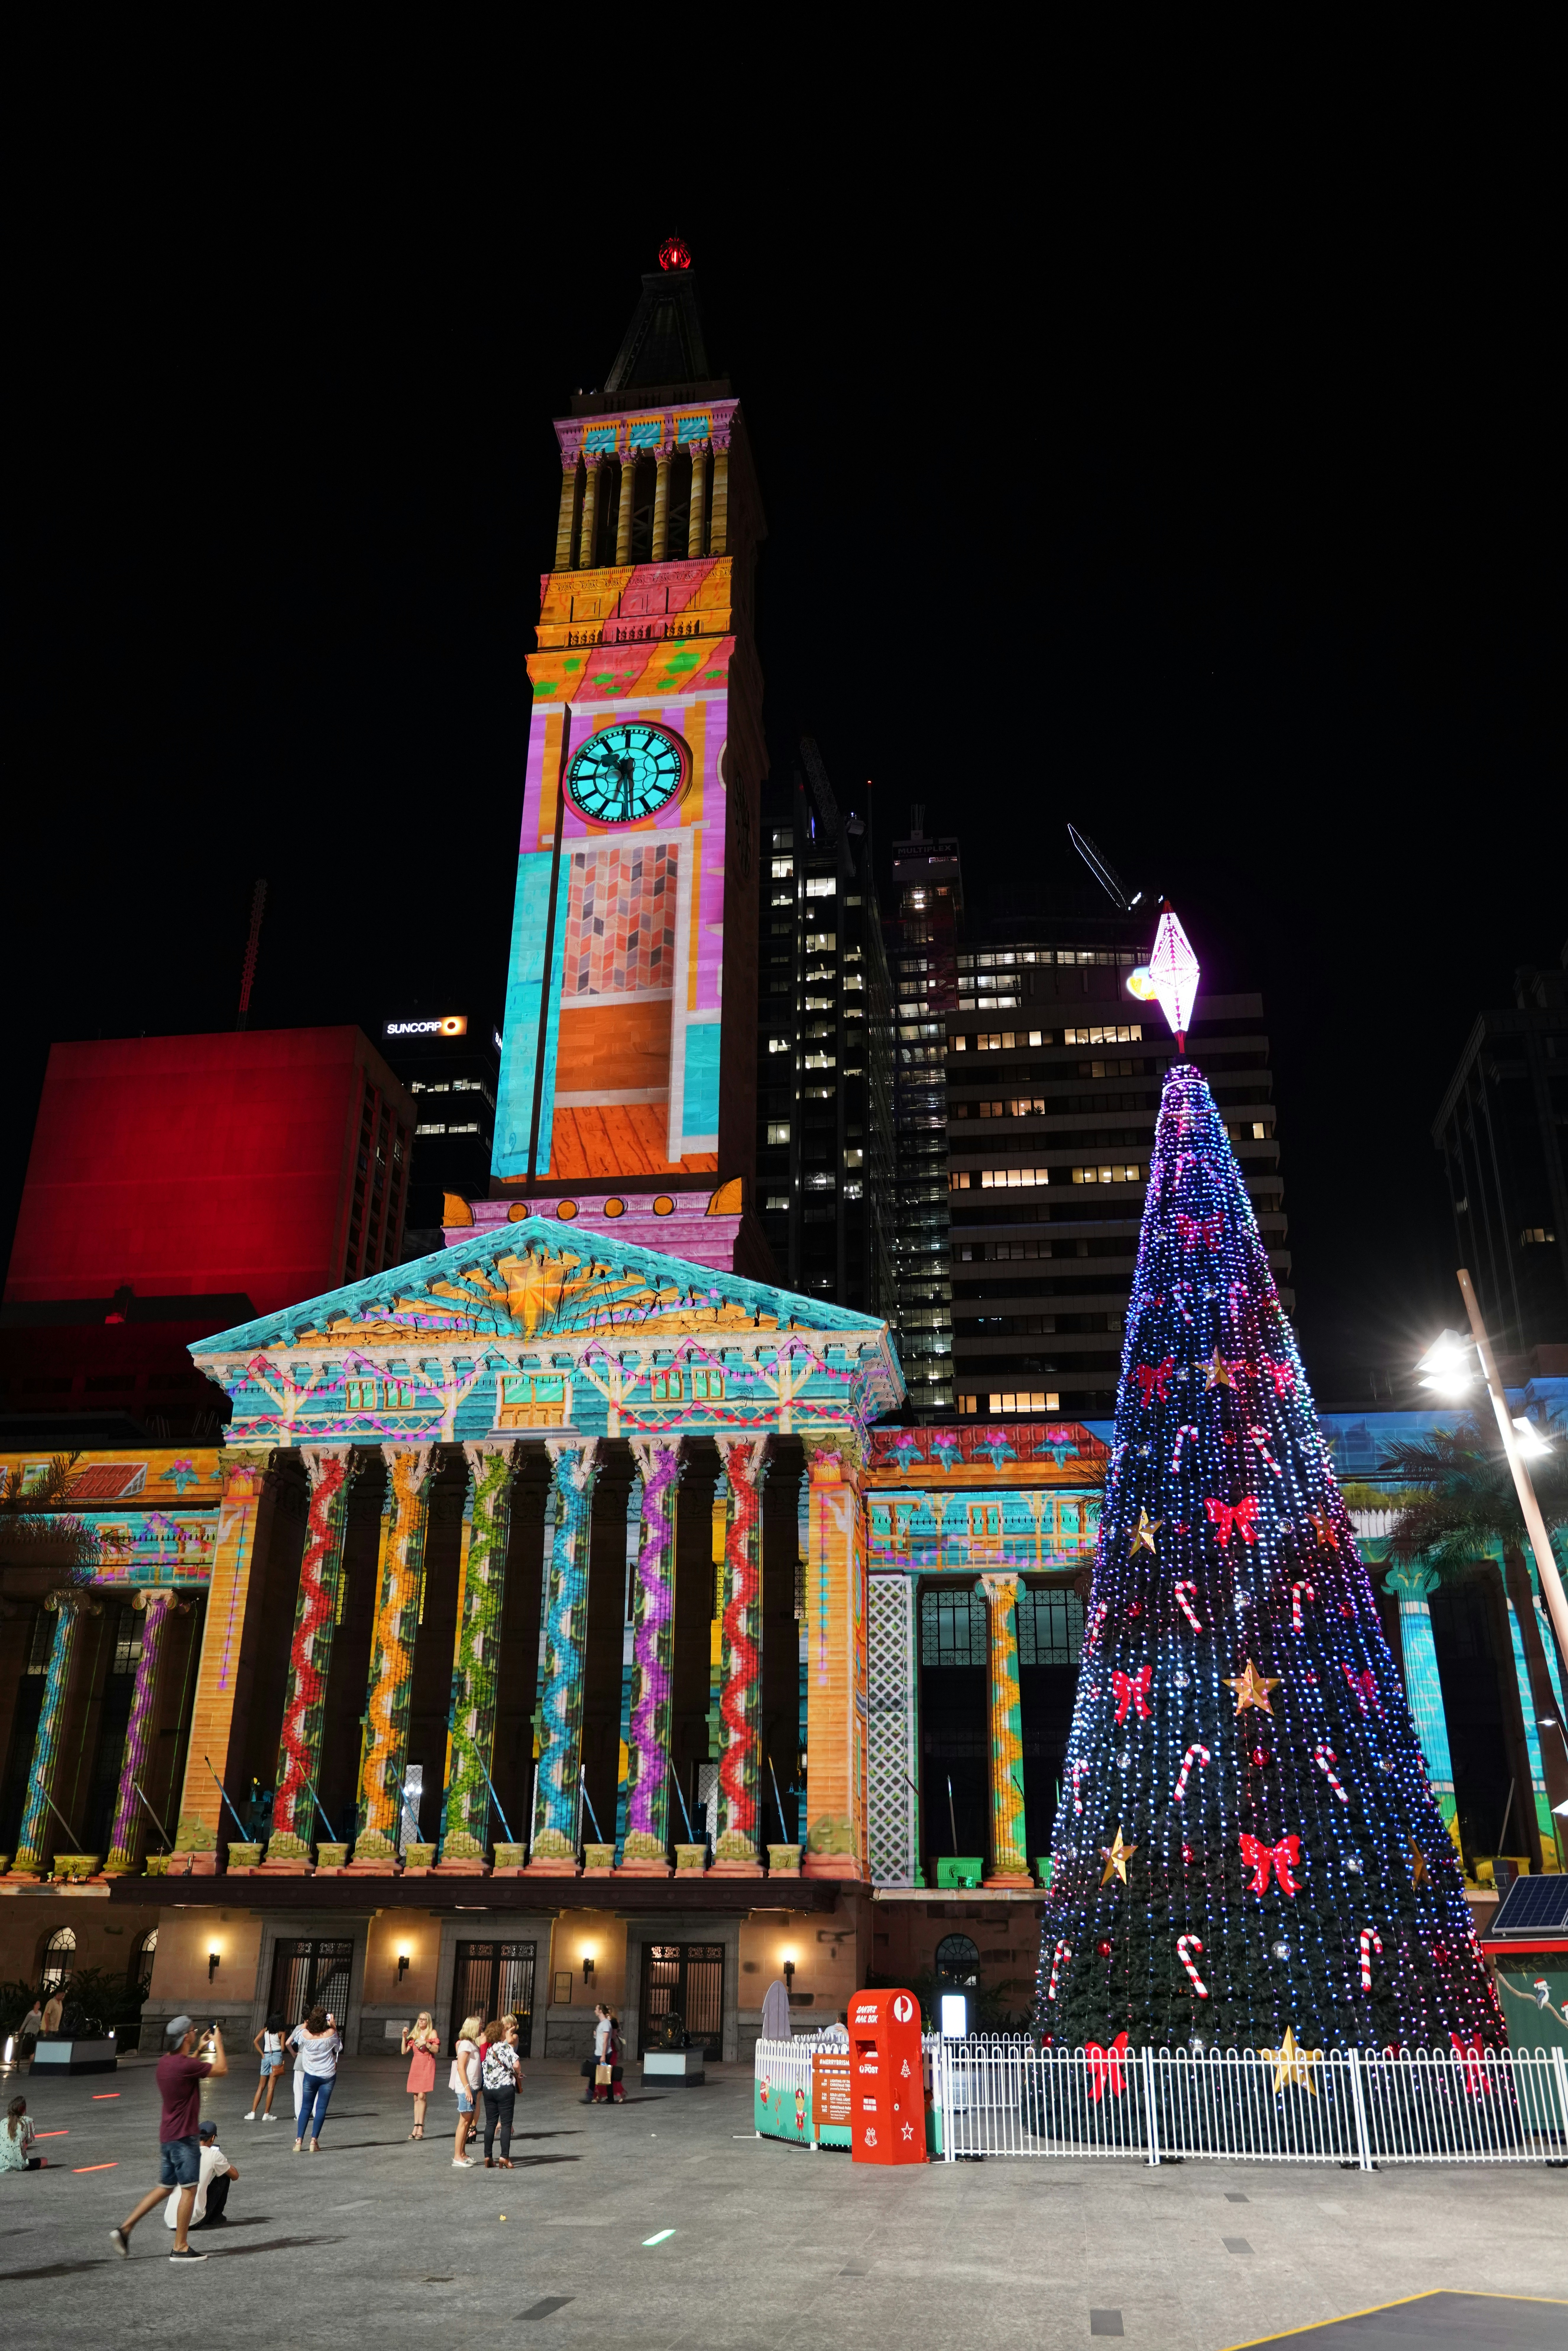 Christmas Lights Show at Brisbane City Hall. The exterior of the hall is illuminated by a colourful light projection and there is a very tall, decorated Christmas tree outside the building